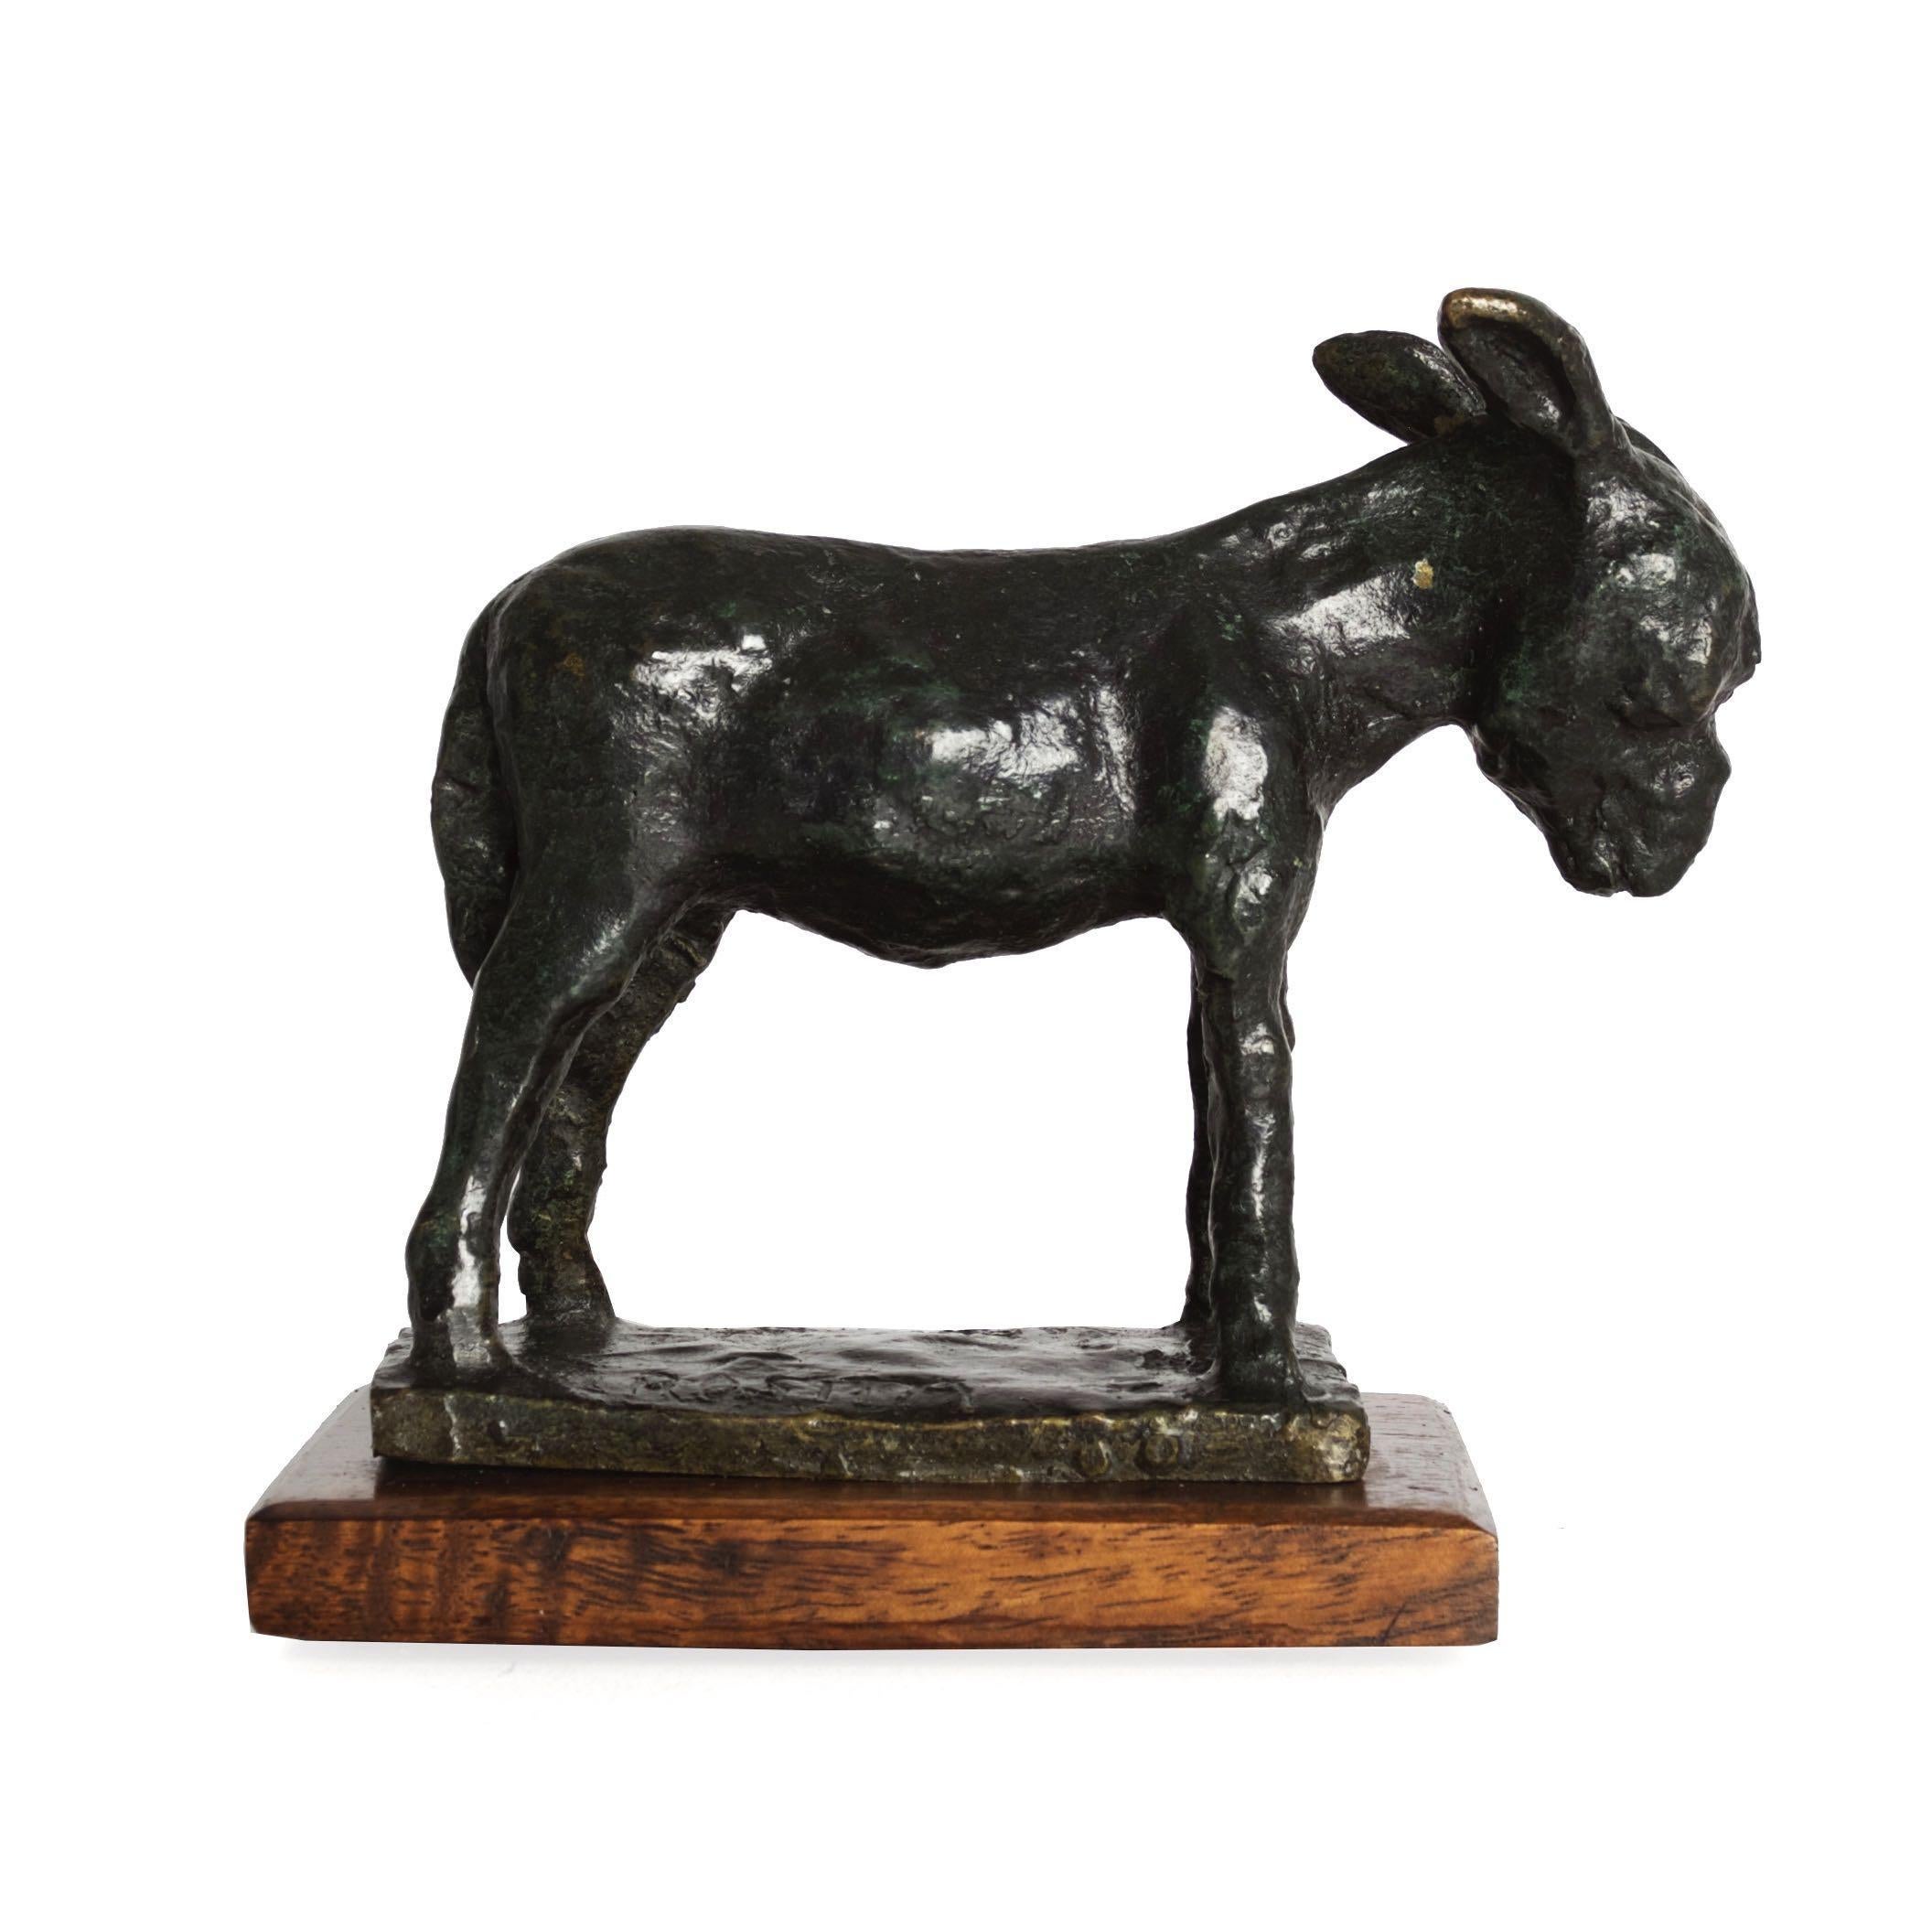 A rich little bronze from a series Pappe completed showcasing studies of foals in various positions. The surface is beautifully textured and shows fantastic capture of the details from the underlying mold throughout, this heightened with the use of